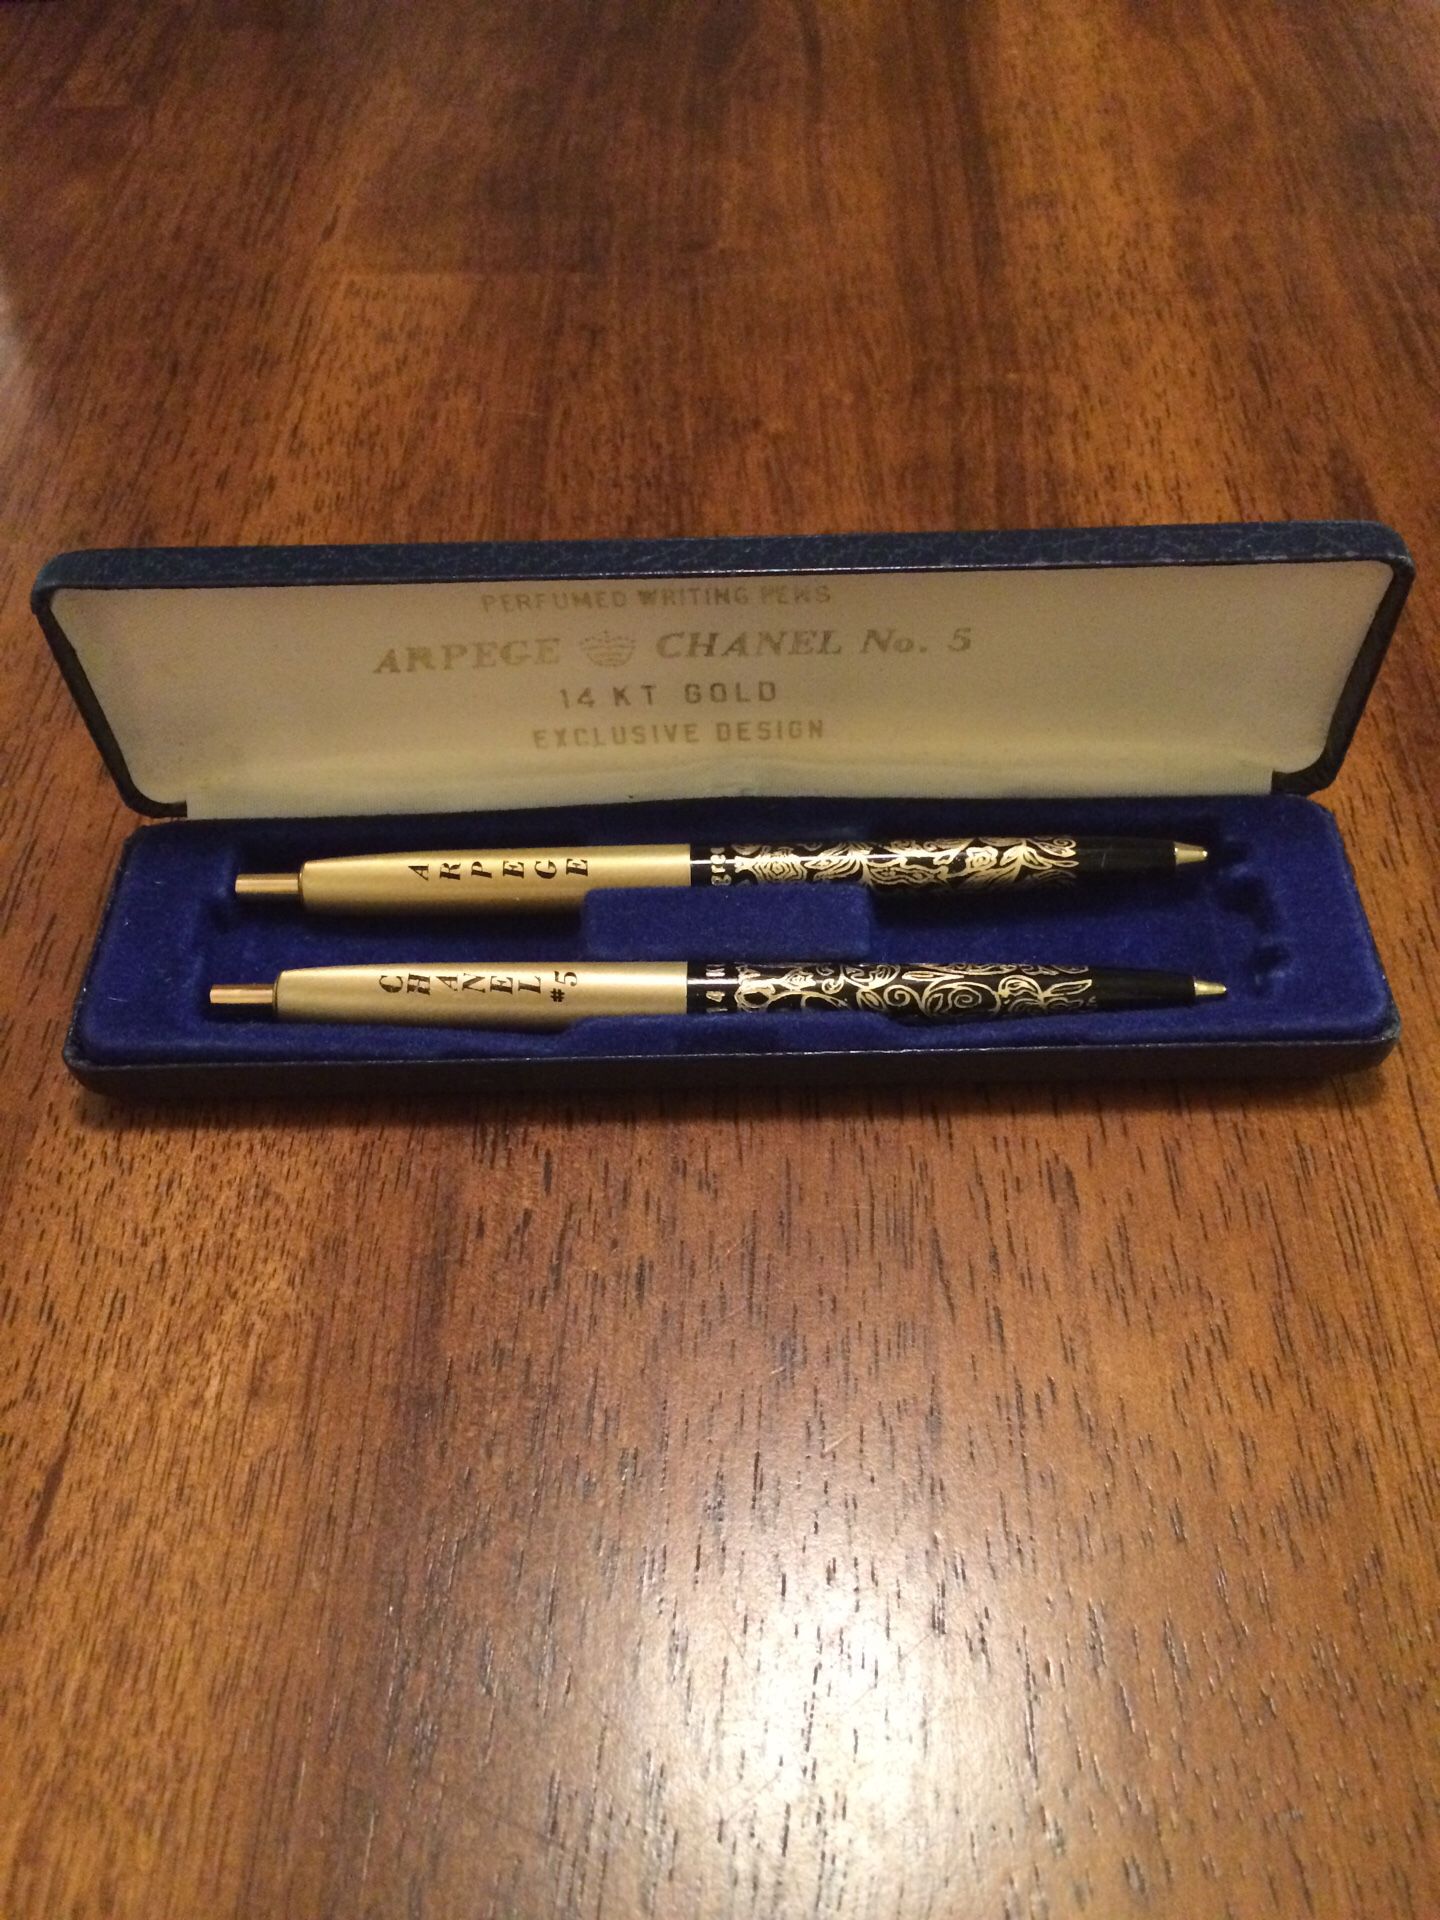 Chanel No. 5 - Perfume Writing Pens for Sale in Glendale, AZ - OfferUp